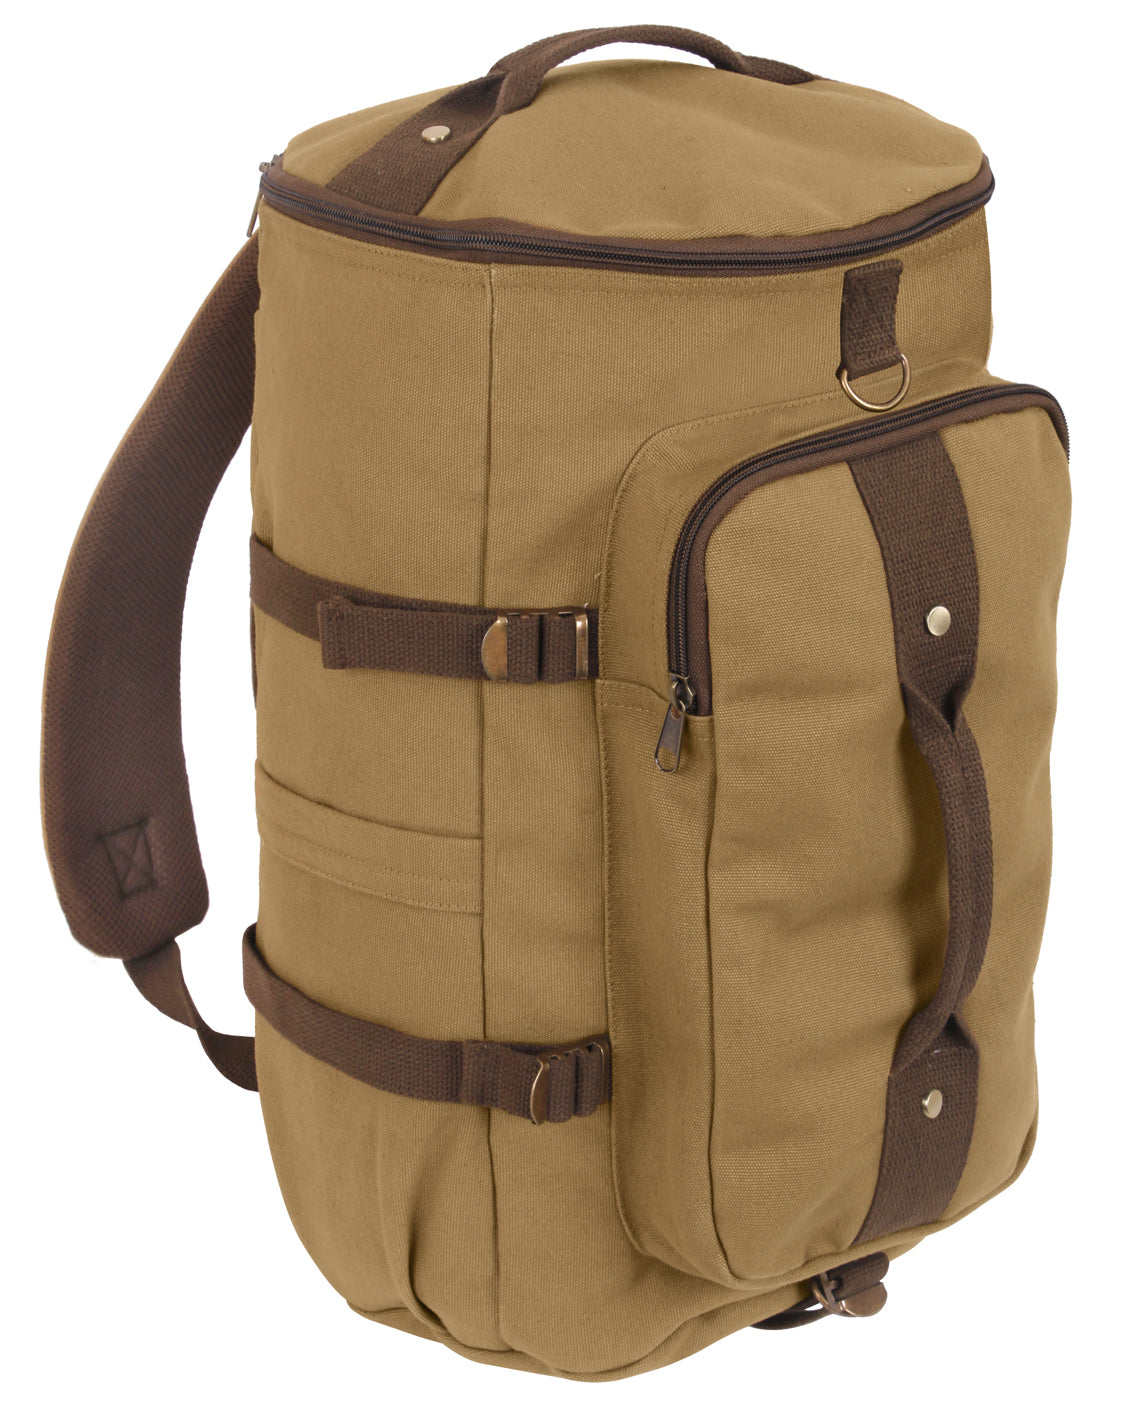 Rothco G.I. Style Canvas Double Strap Duffle Bag - Coyote Brown